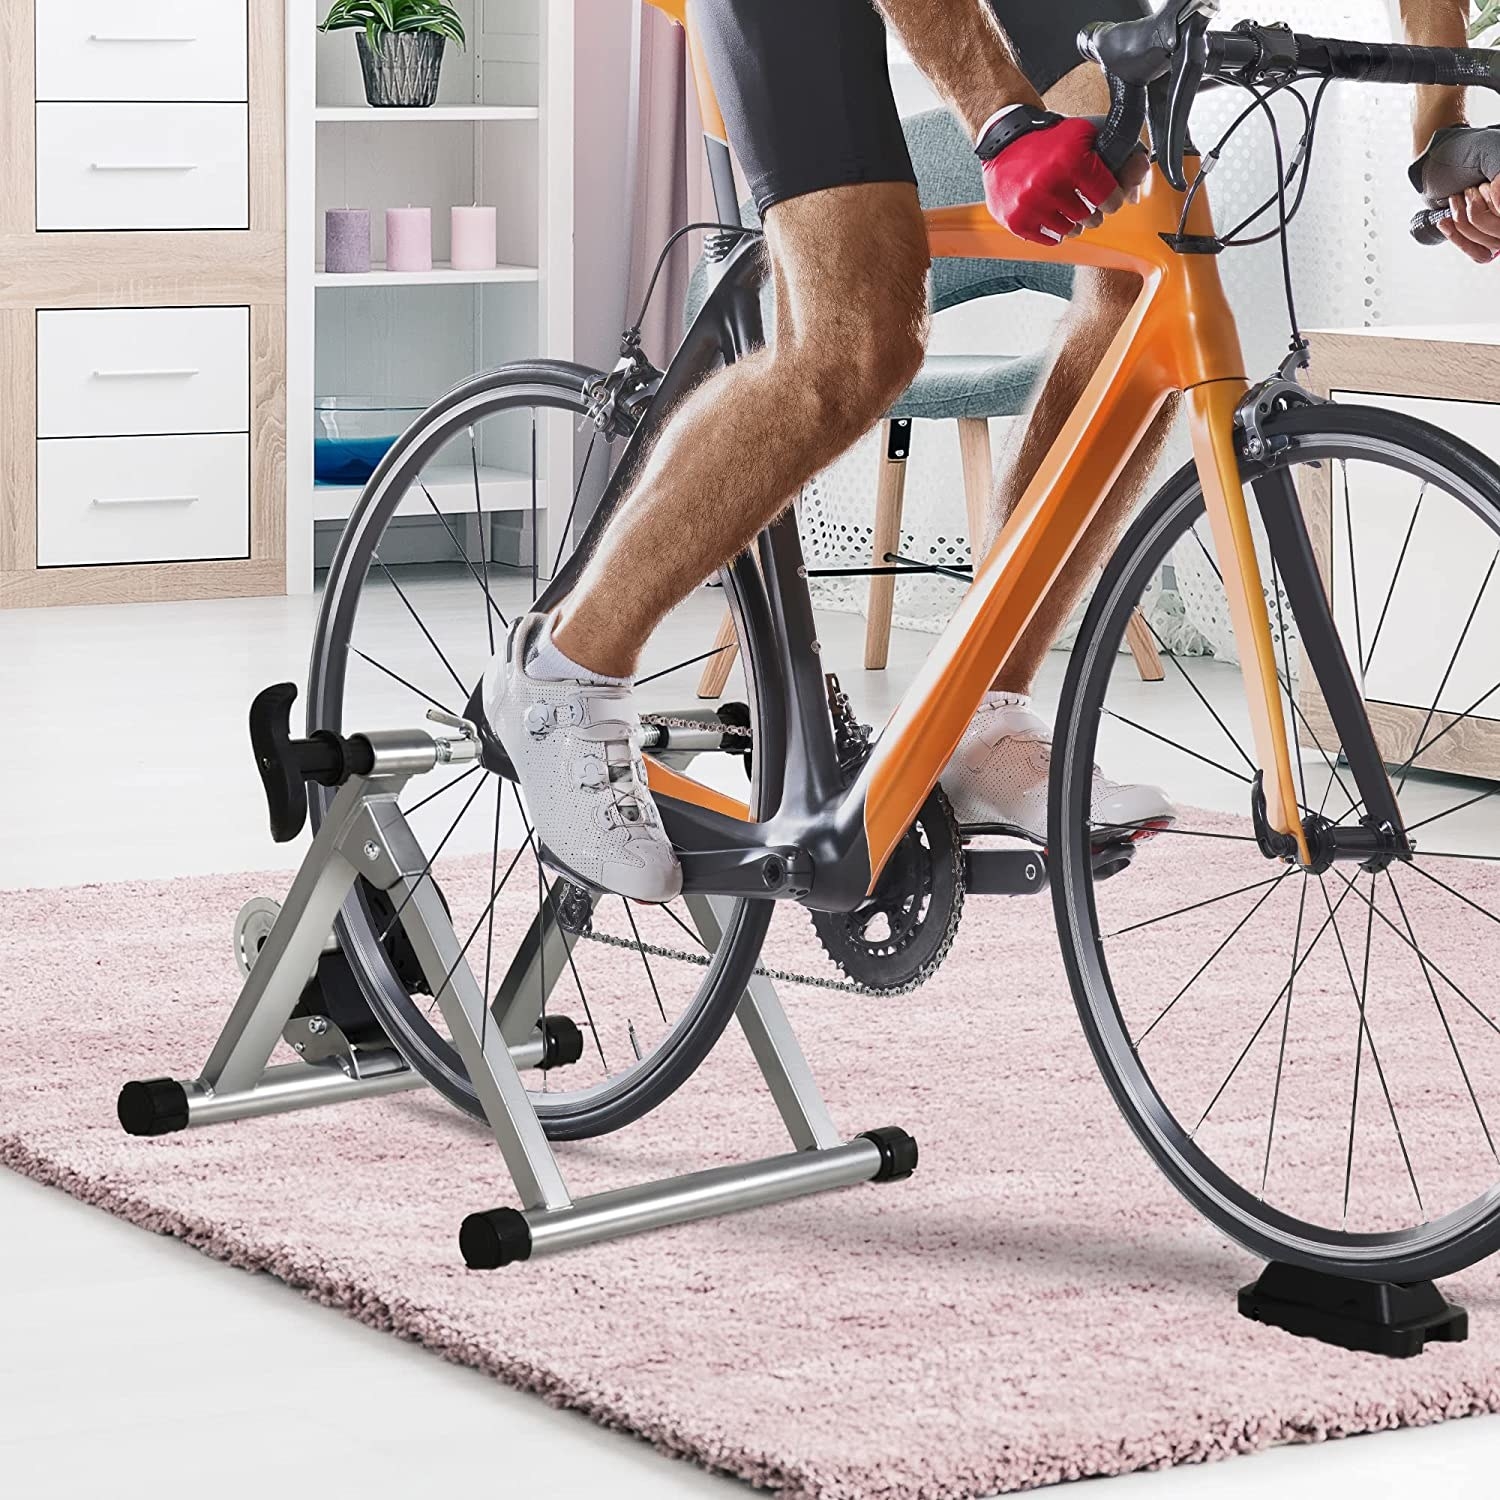 A bike on the stand on a plush carpet